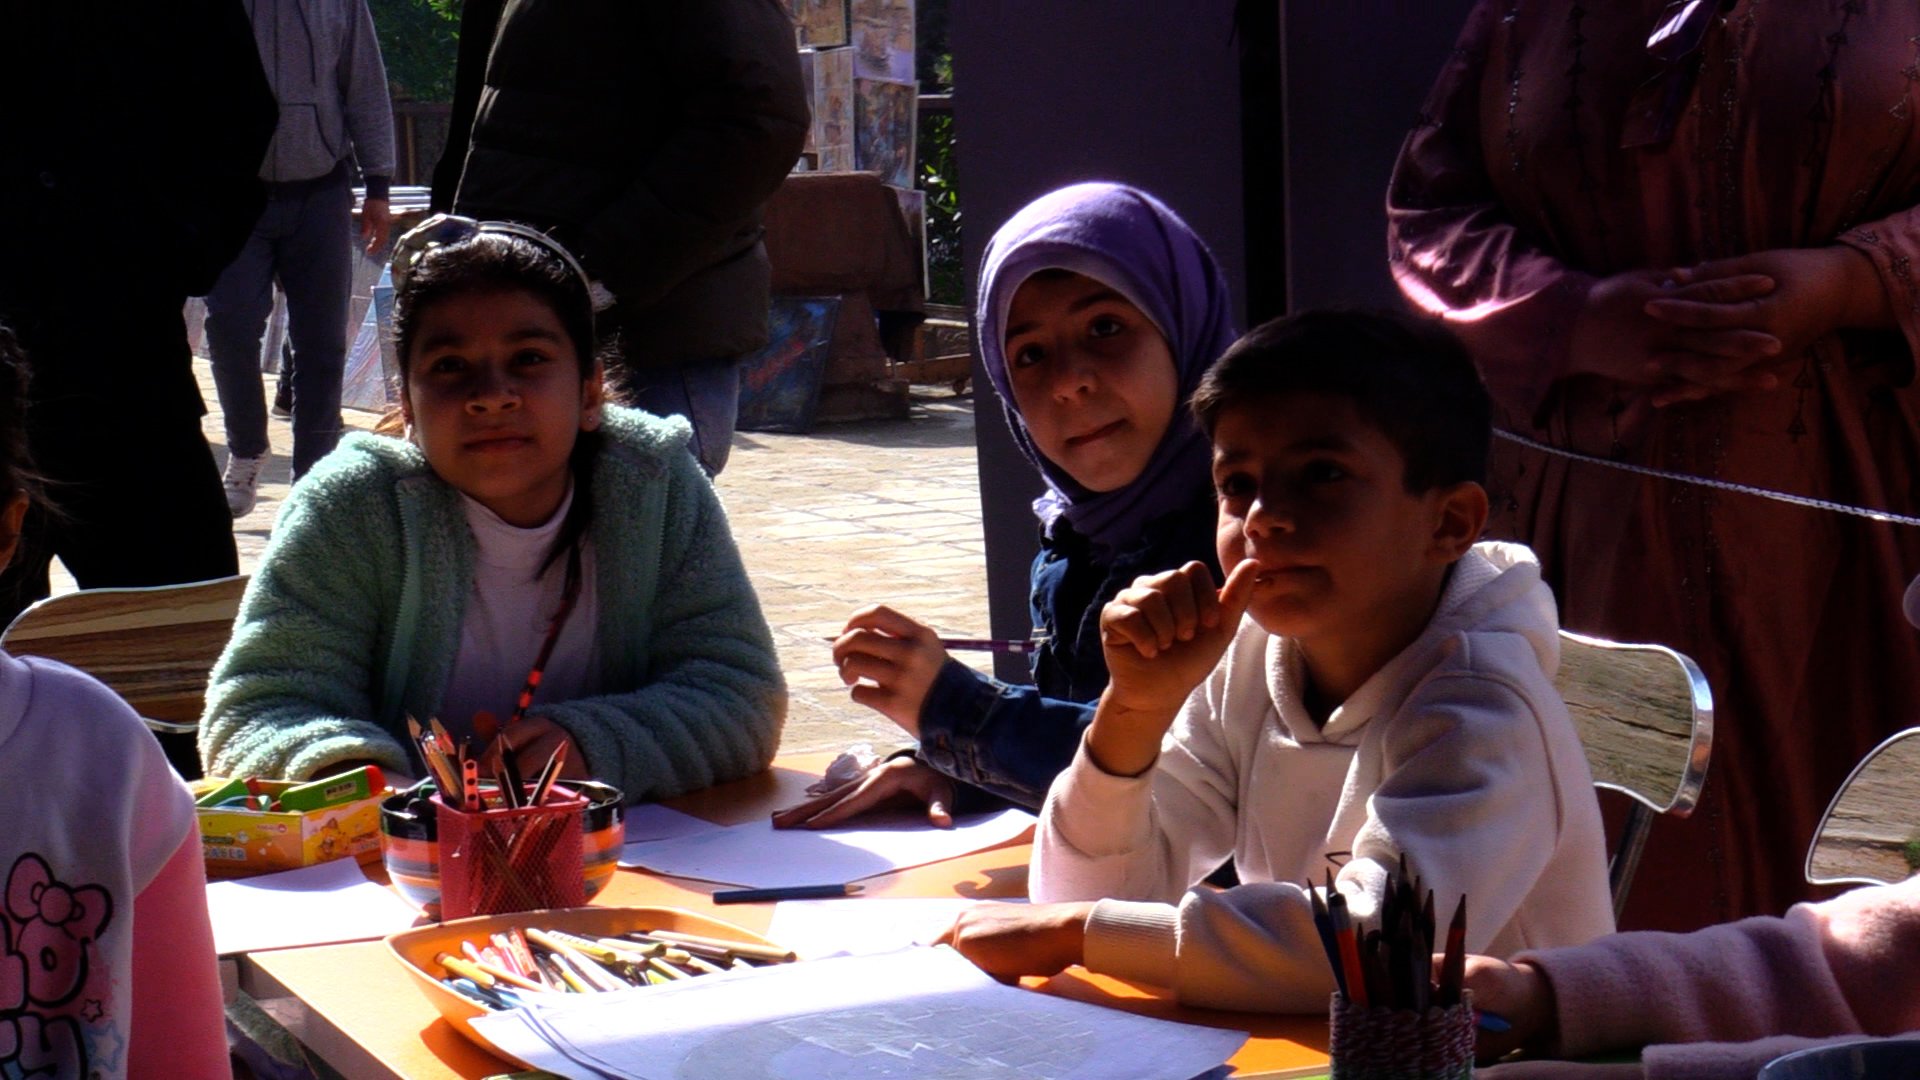 Baghdad cultural center launches free childrens arts program